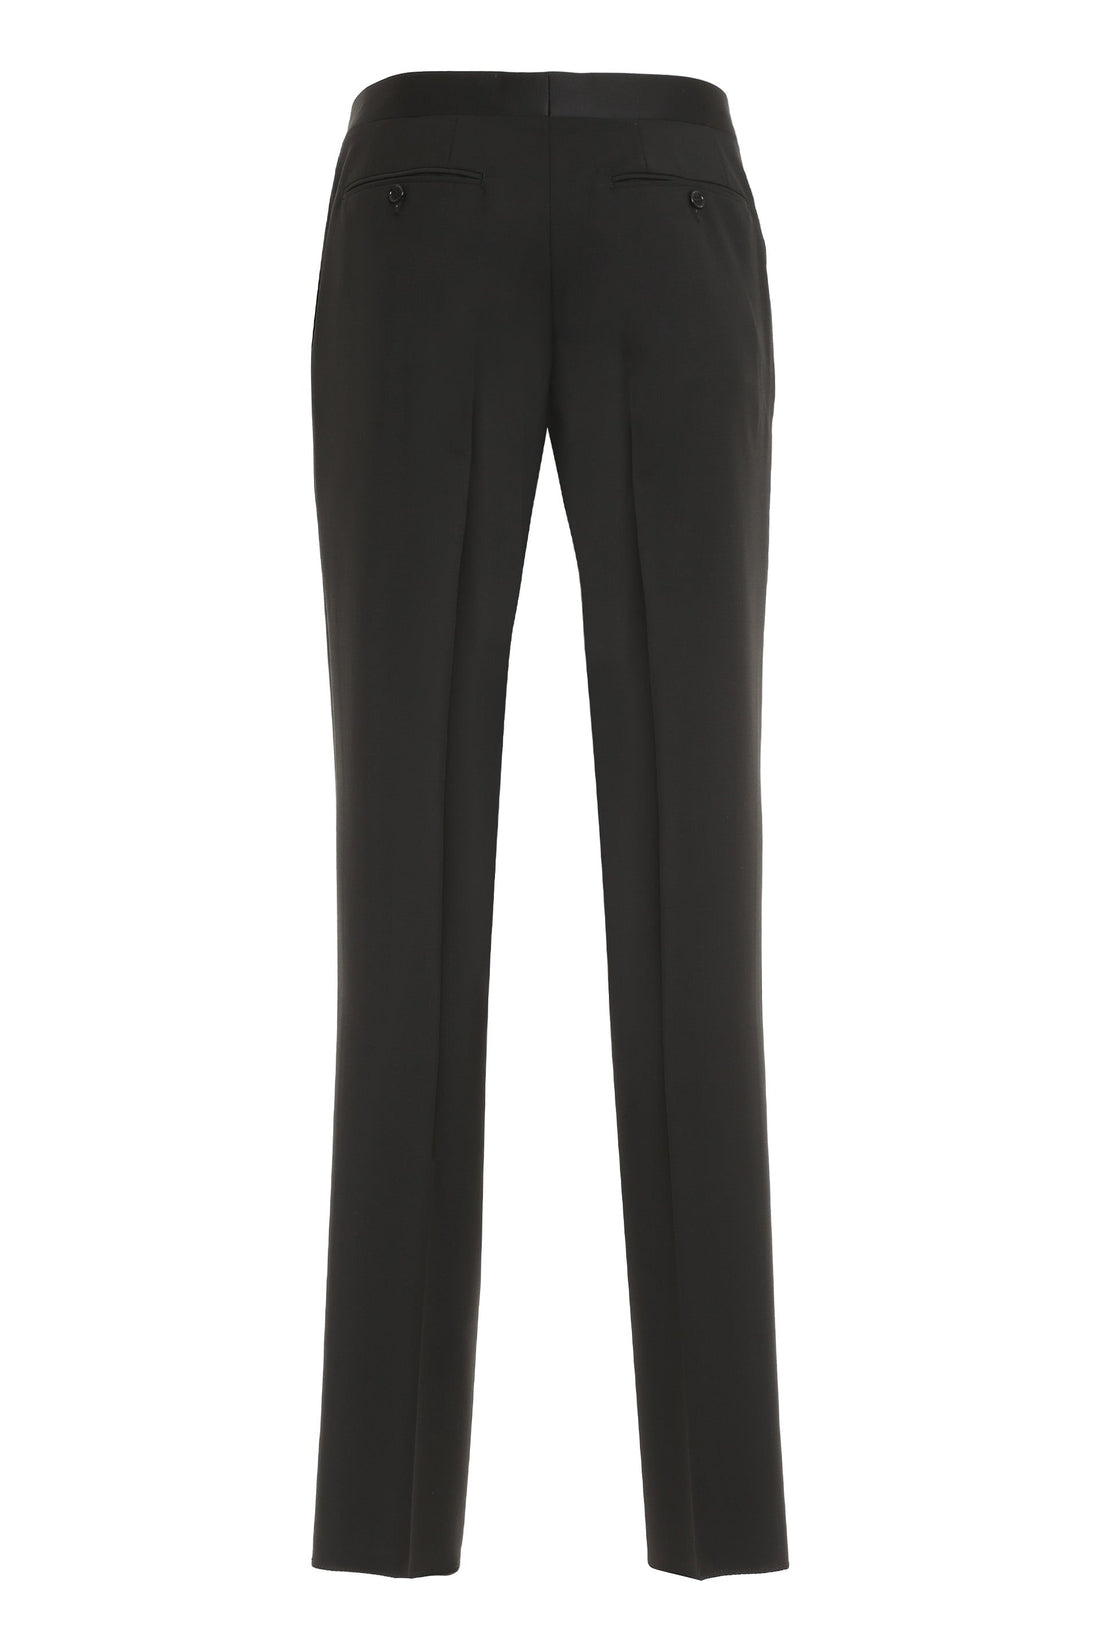 Canali-OUTLET-SALE-Wool blend tailored trousers-ARCHIVIST